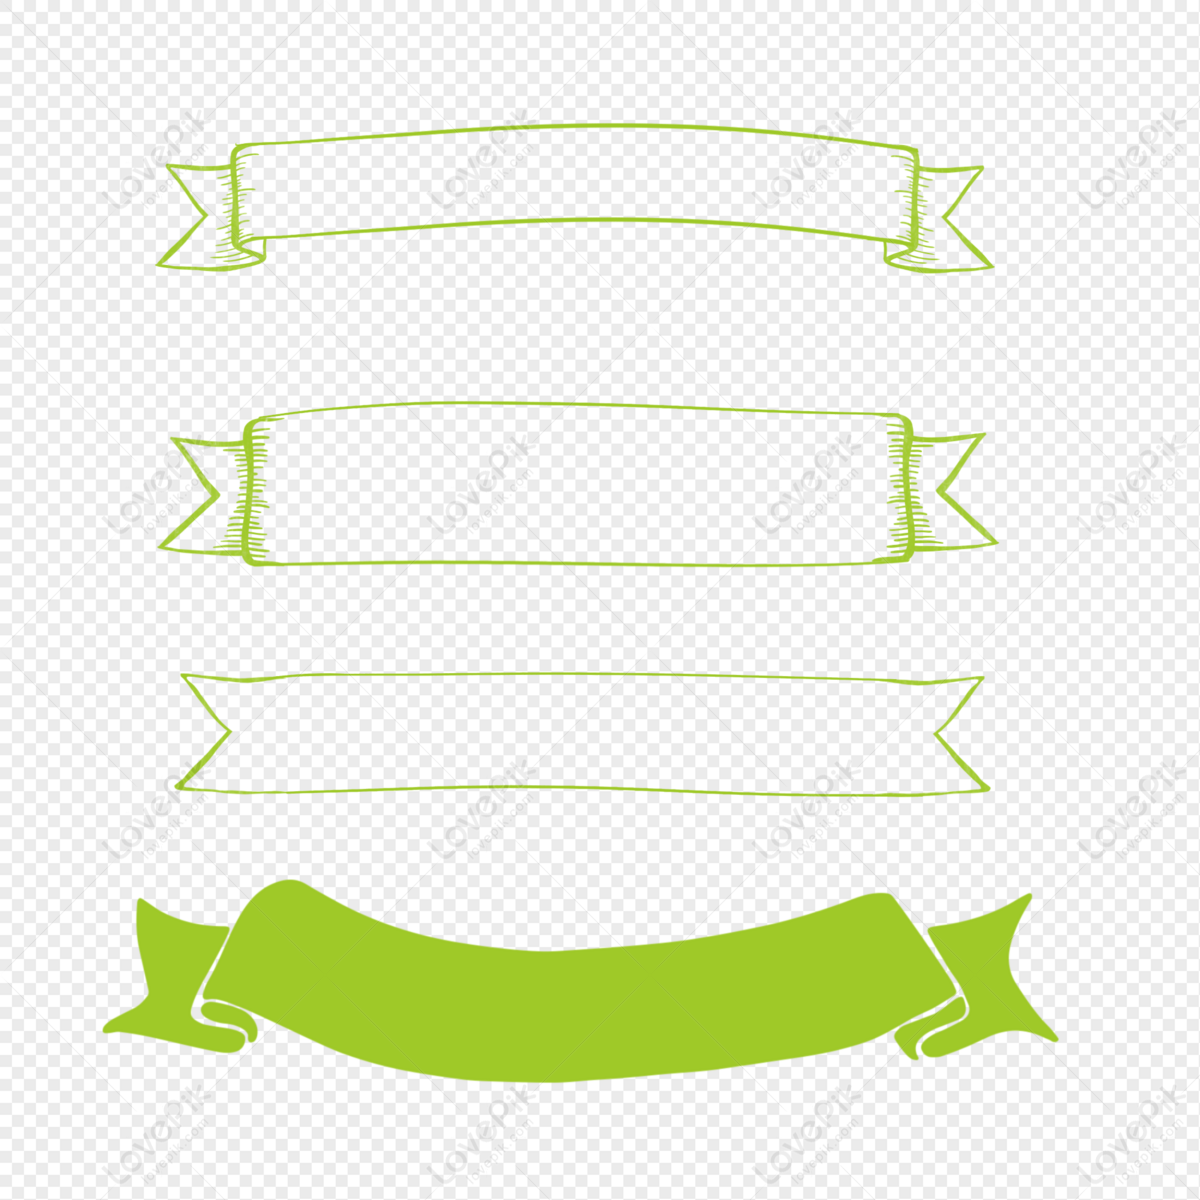 Simple Cartoon Border Decoration Picture PNG Transparent Image And ...